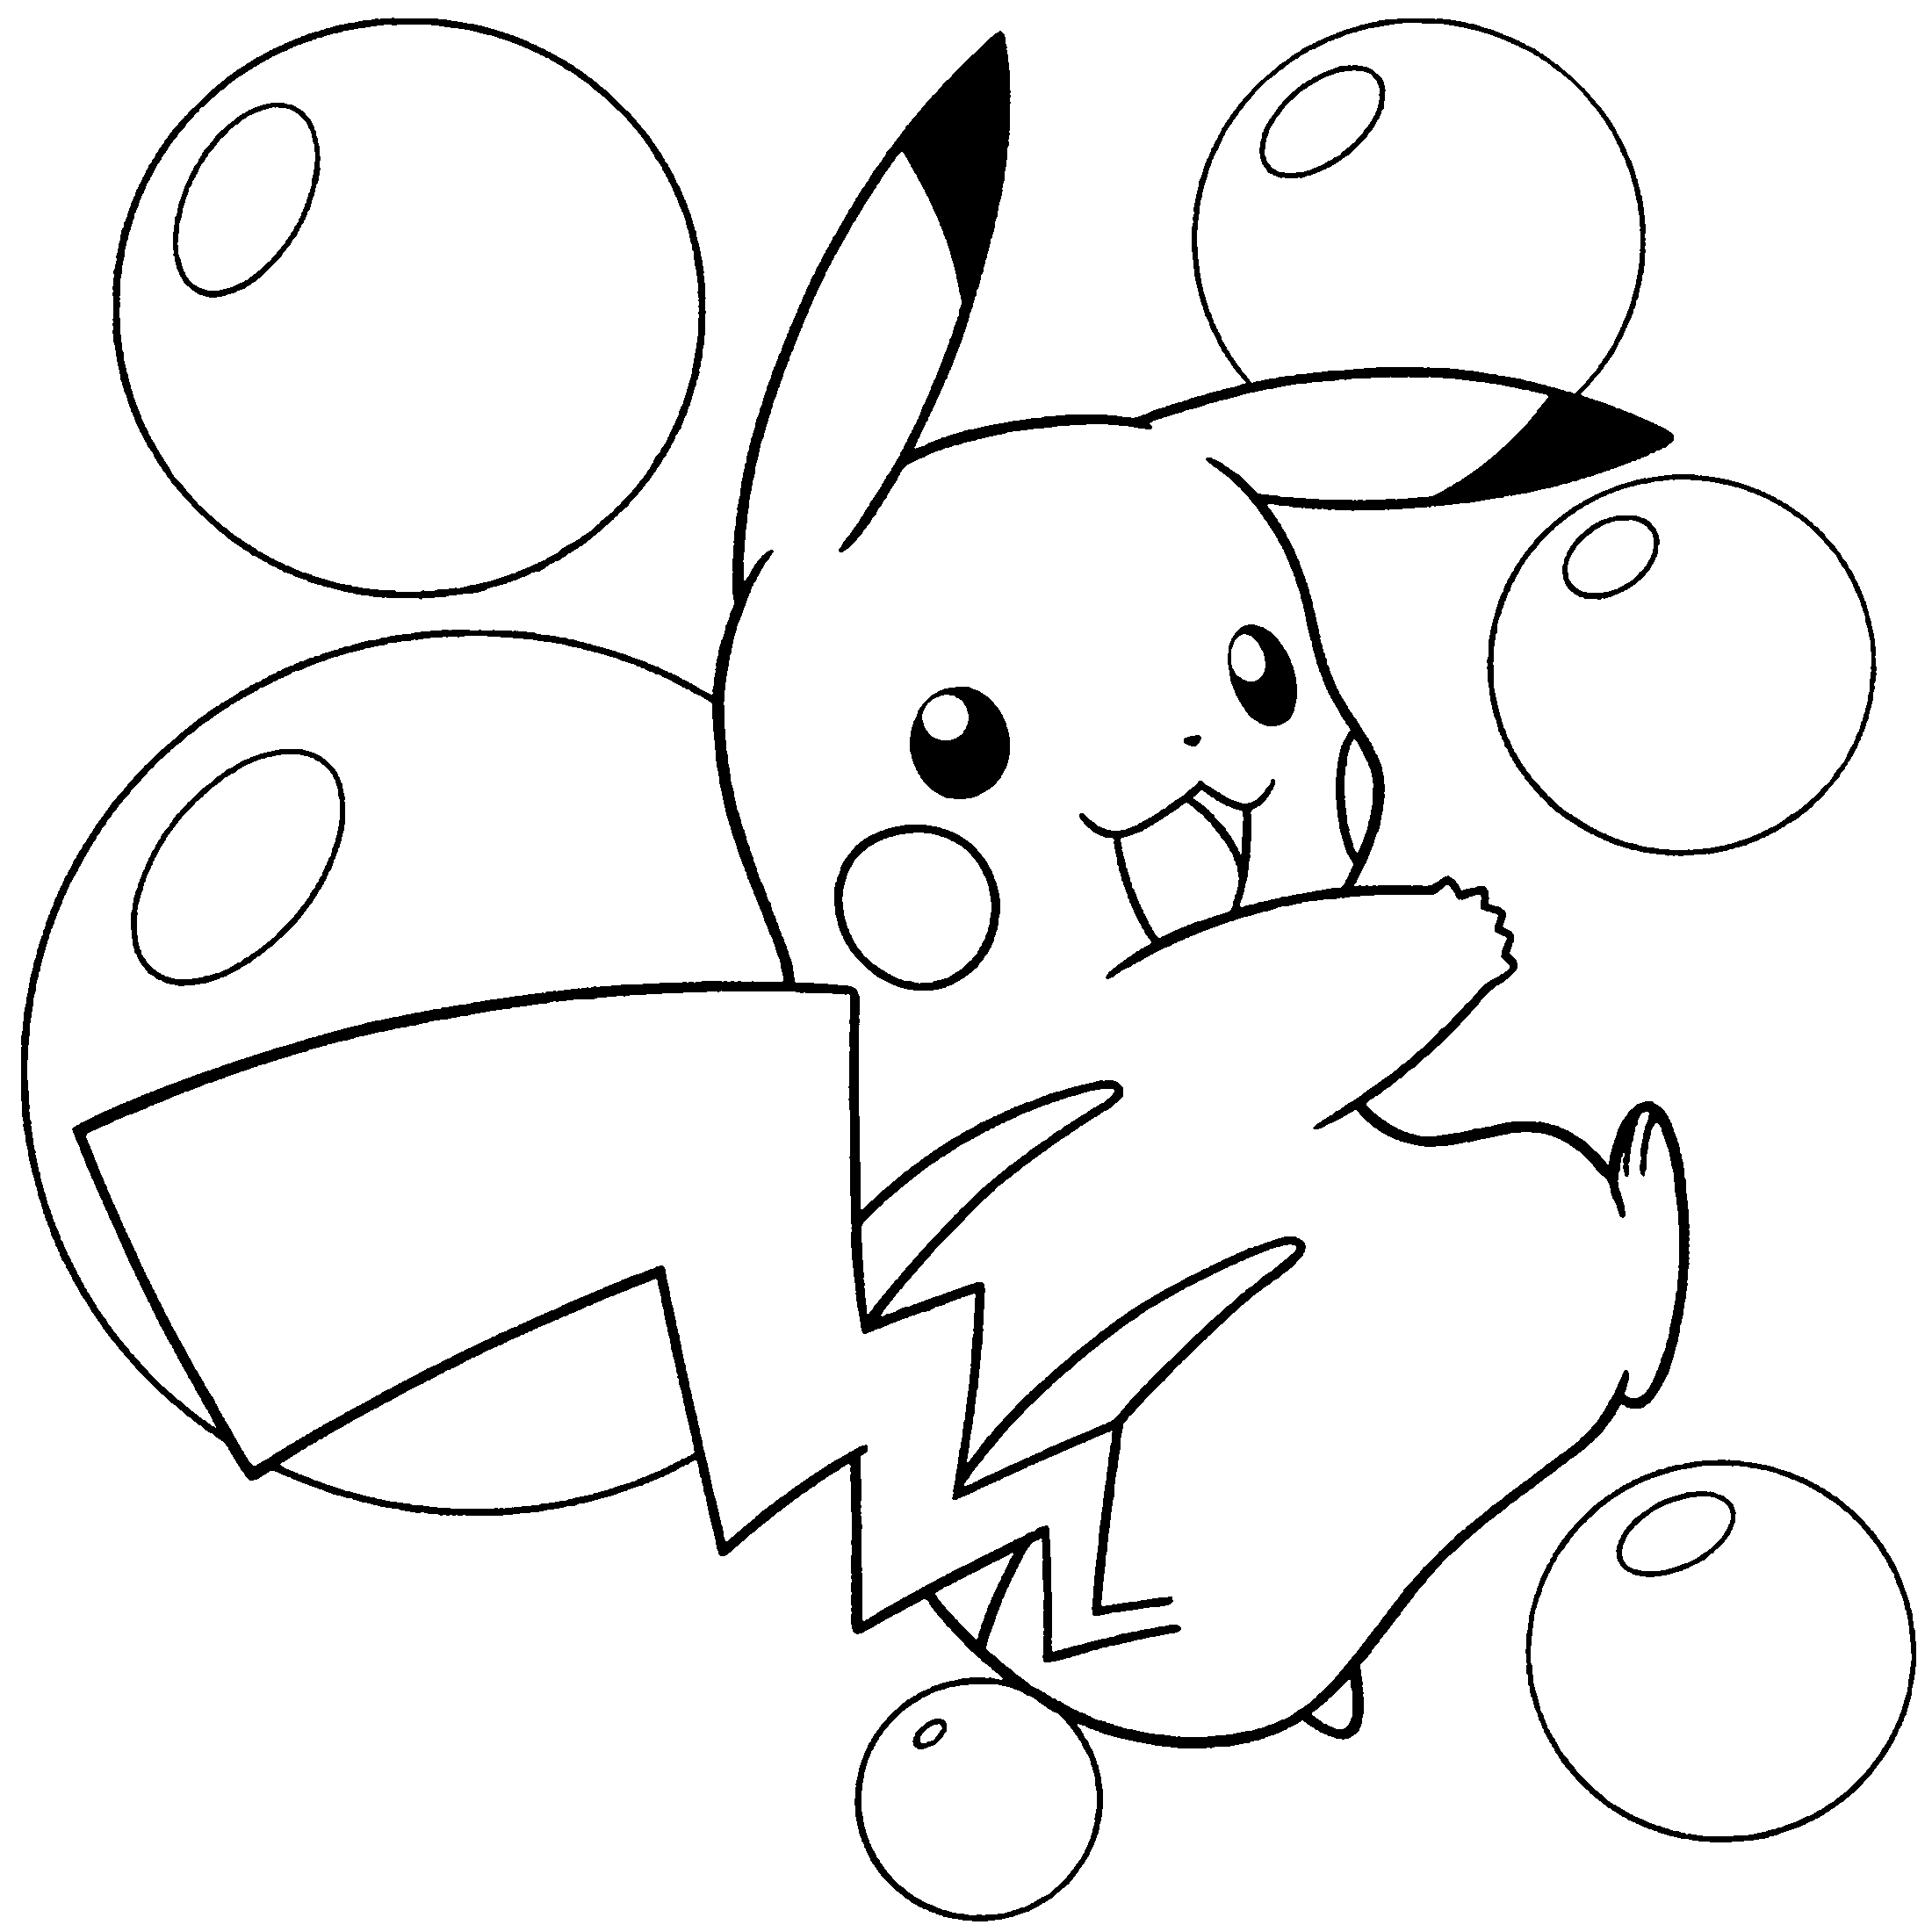 pikachu-coloring-pages-to-download-and-print-for-free